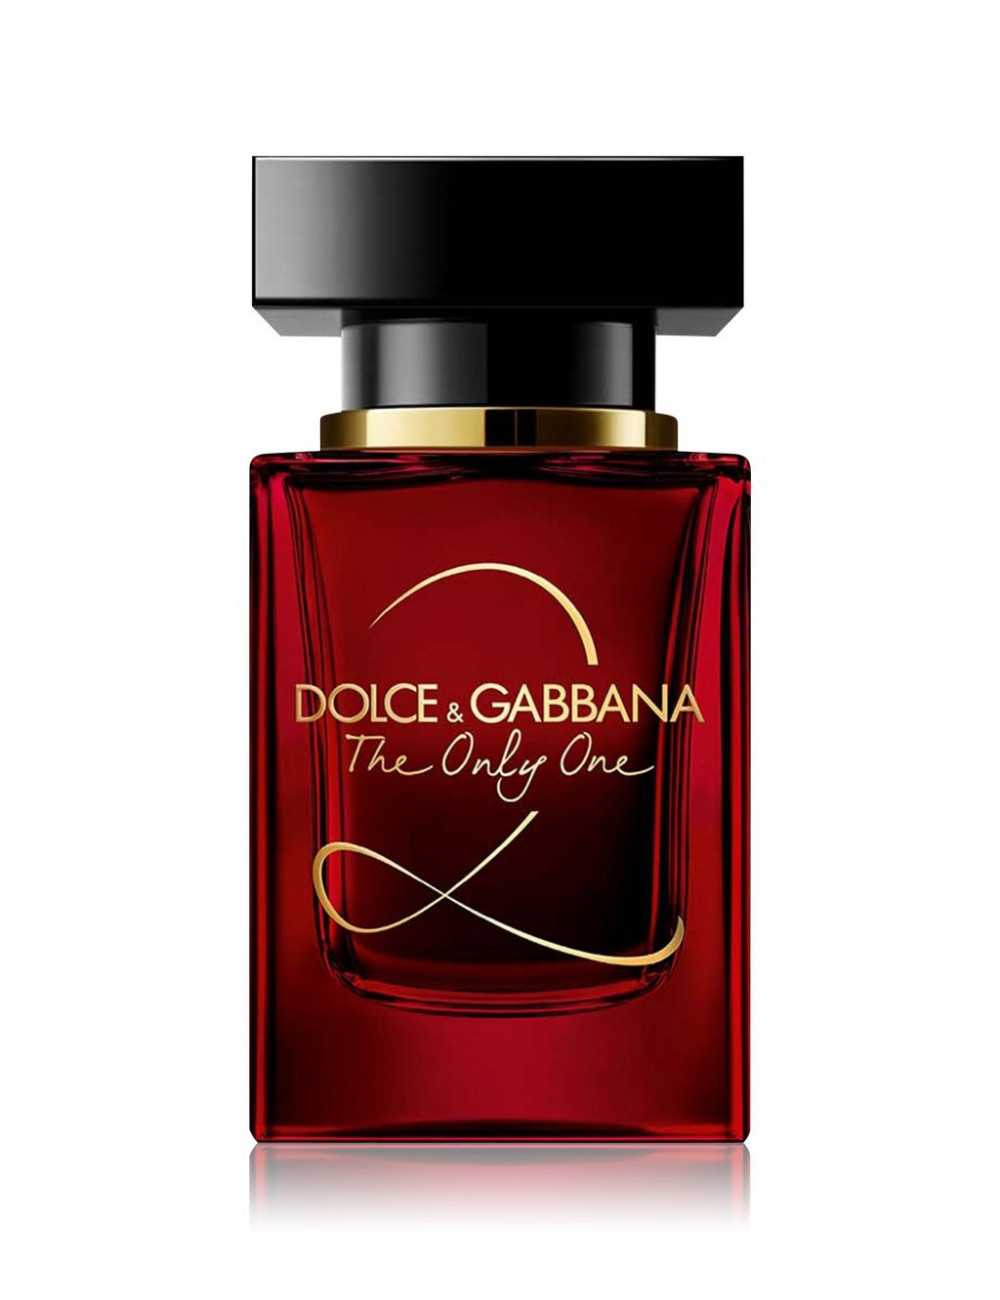 Dolce&Gabbana The Only One 2 EDP Dolce&Gabbana - rosso.shop